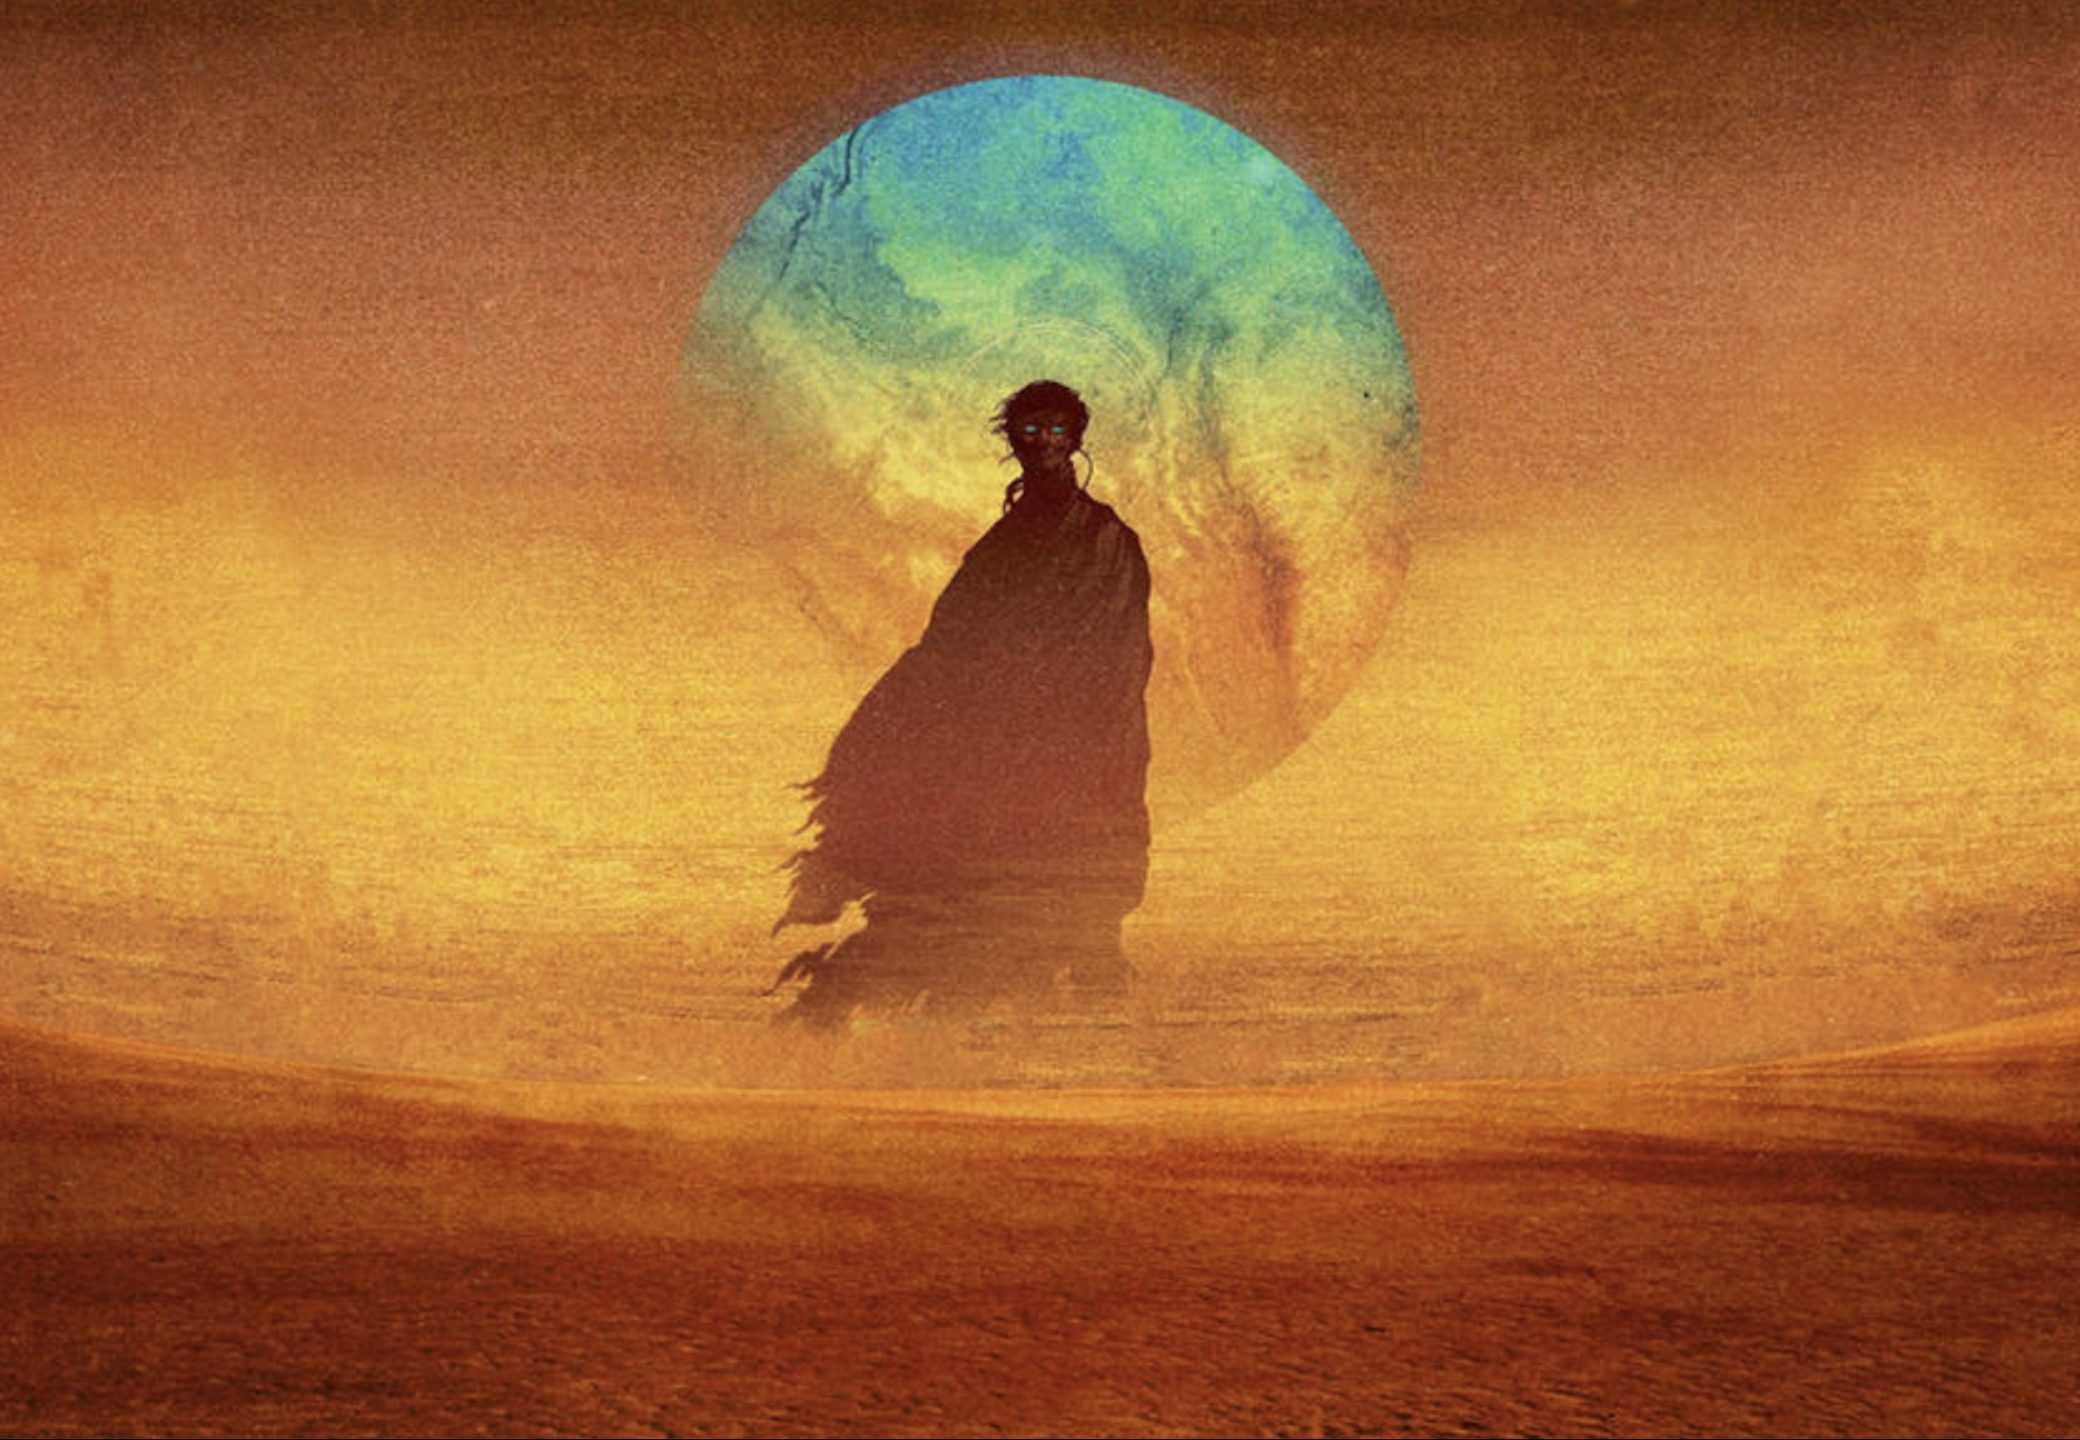 Dune Part 2 wallpaper Resolution 2080x1440 | Best Download this awesome wallpaper - Cool Wallpaper HD - CoolWallpaper-HD.com